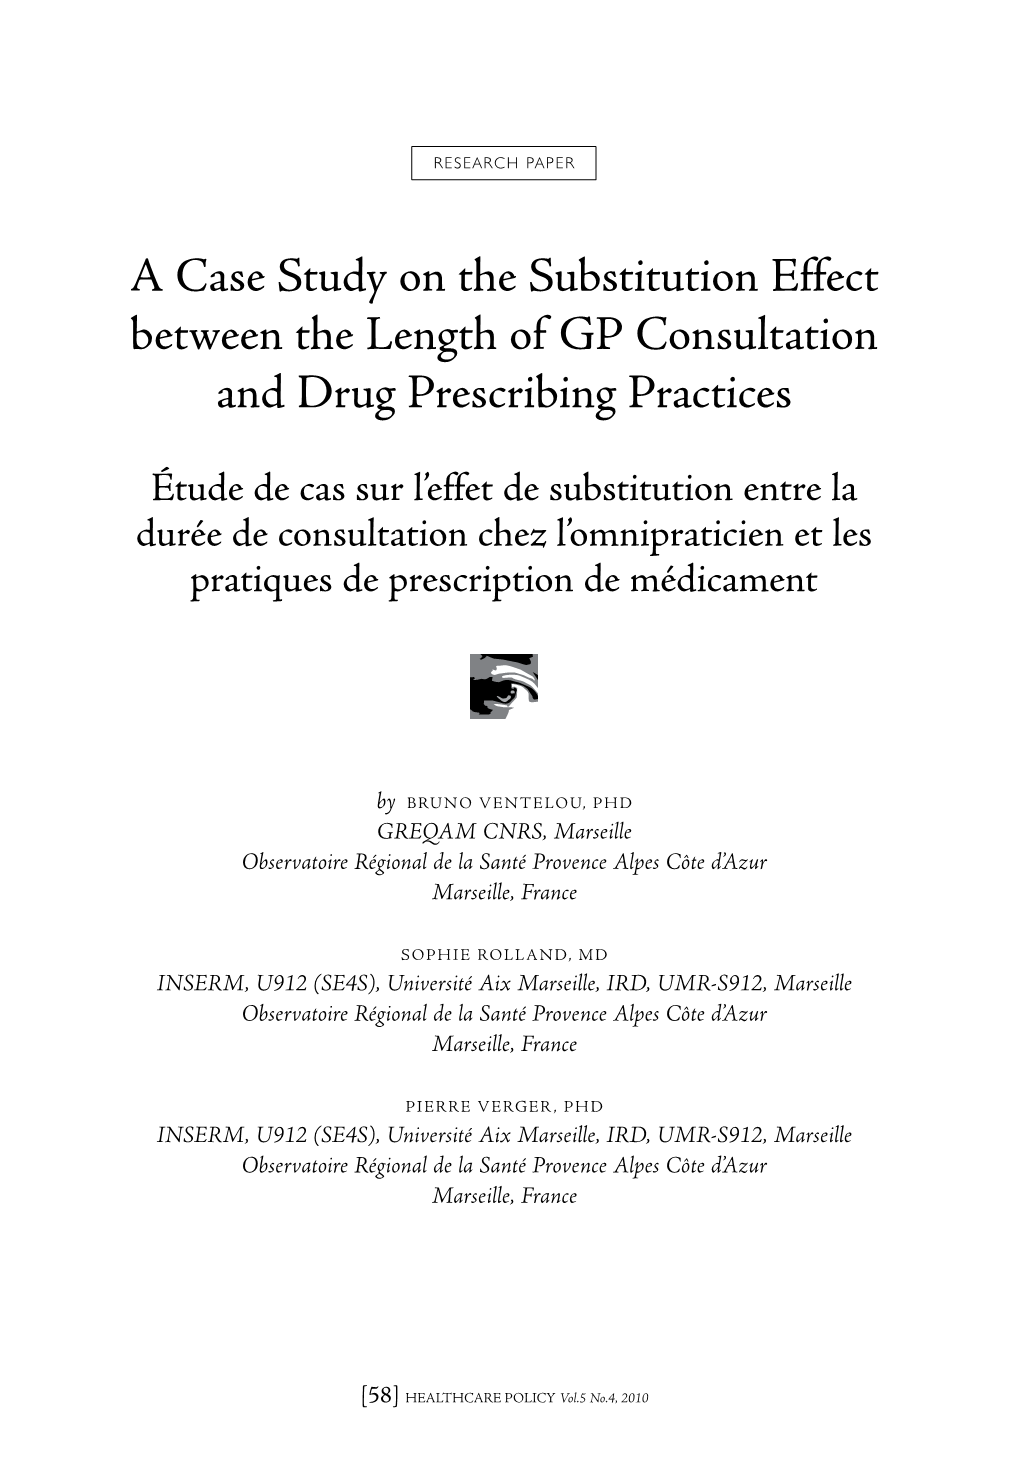 A Case Study on the Substitution Effect Between the Length of GP Consultation and Drug Prescribing Practices